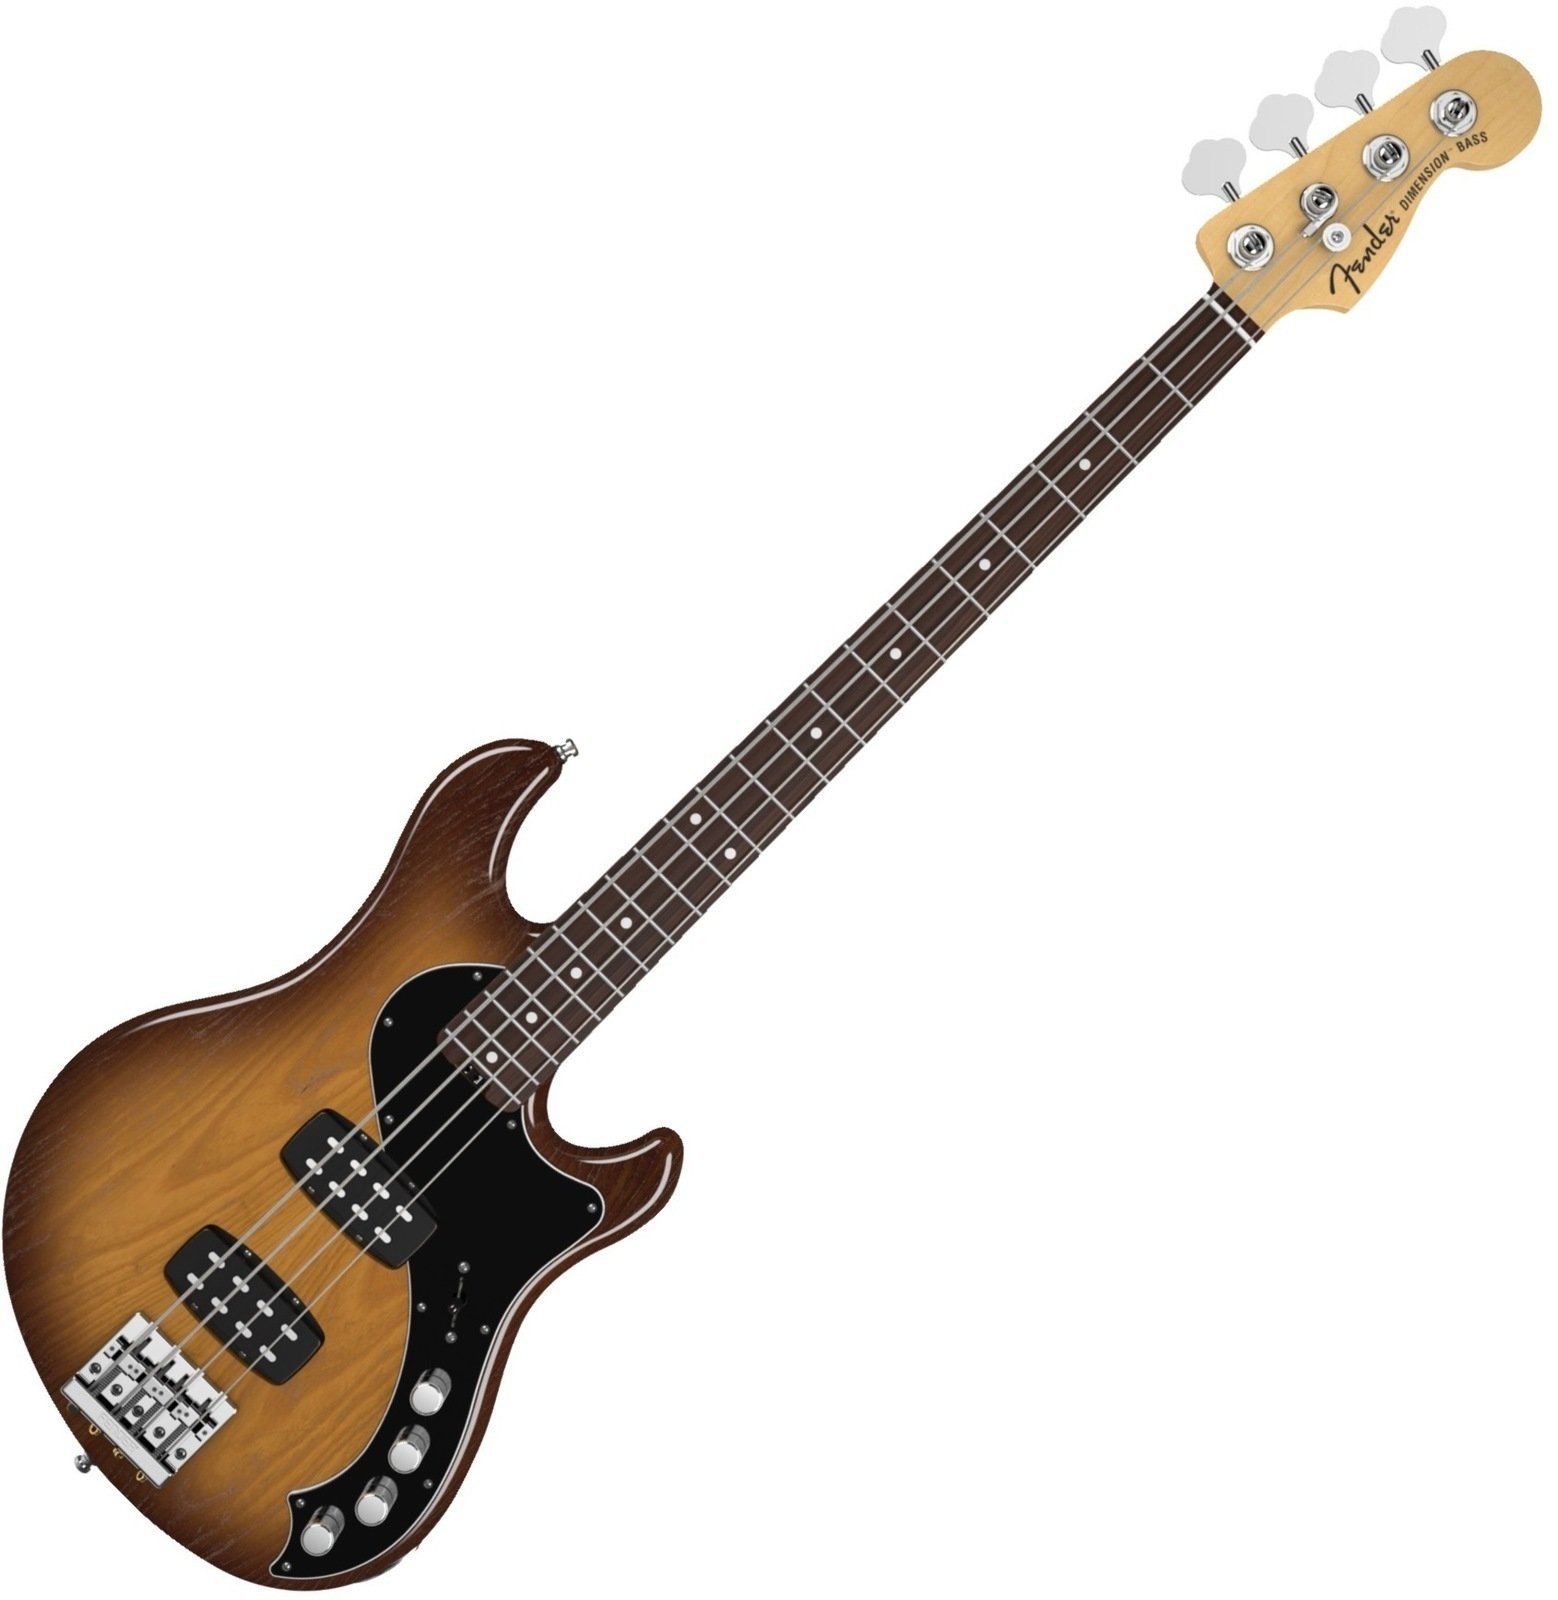 E-Bass Fender American Deluxe Dimension Bass IV HH, Rosewood Fingerboard, Violin Burst